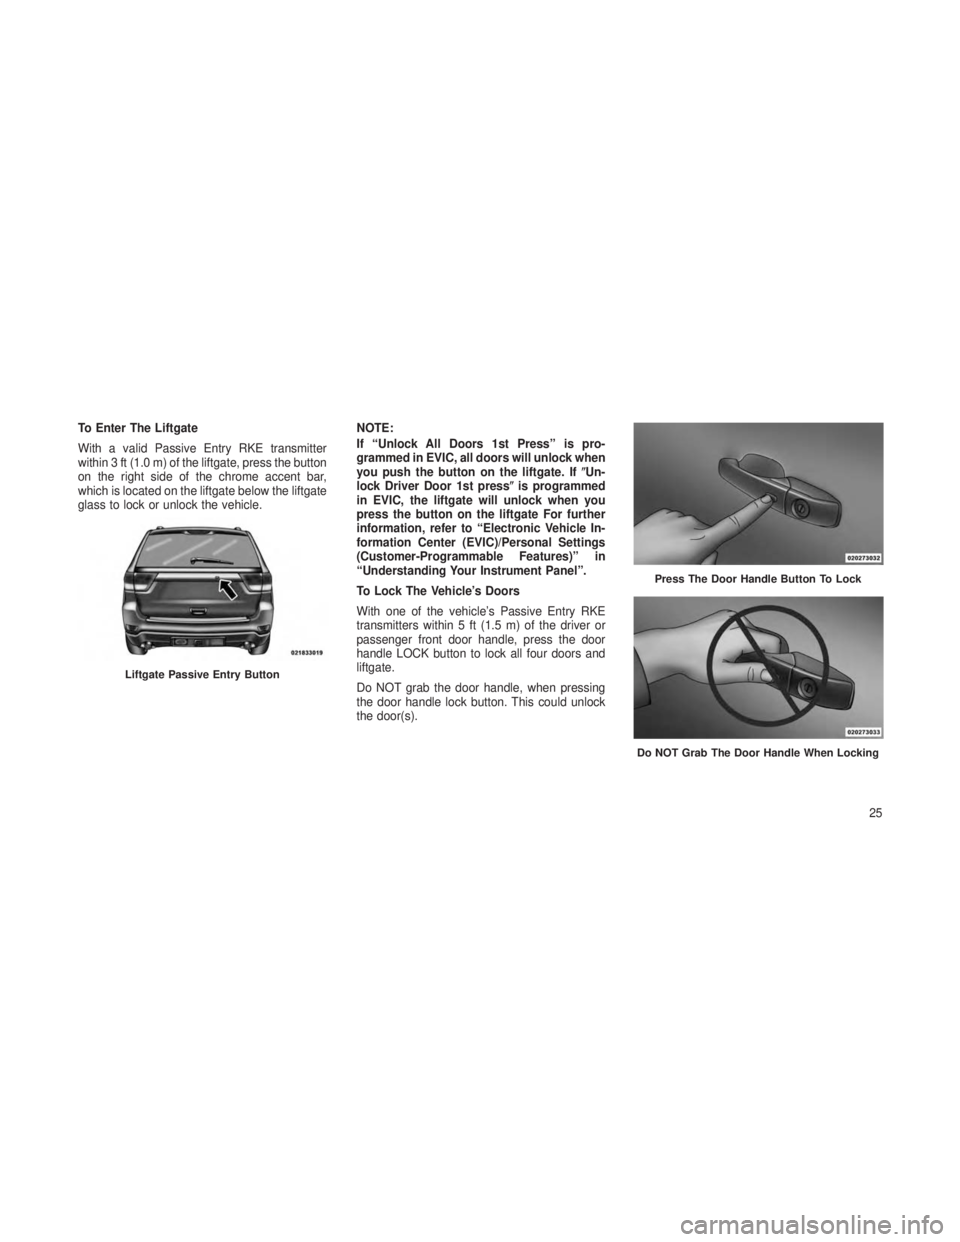 JEEP GRAND CHEROKEE 2013  Owner handbook (in English) To Enter The Liftgate
With a valid Passive Entry RKE transmitter
within 3 ft (1.0 m) of the liftgate, press the button
on the right side of the chrome accent bar,
which is located on the liftgate belo